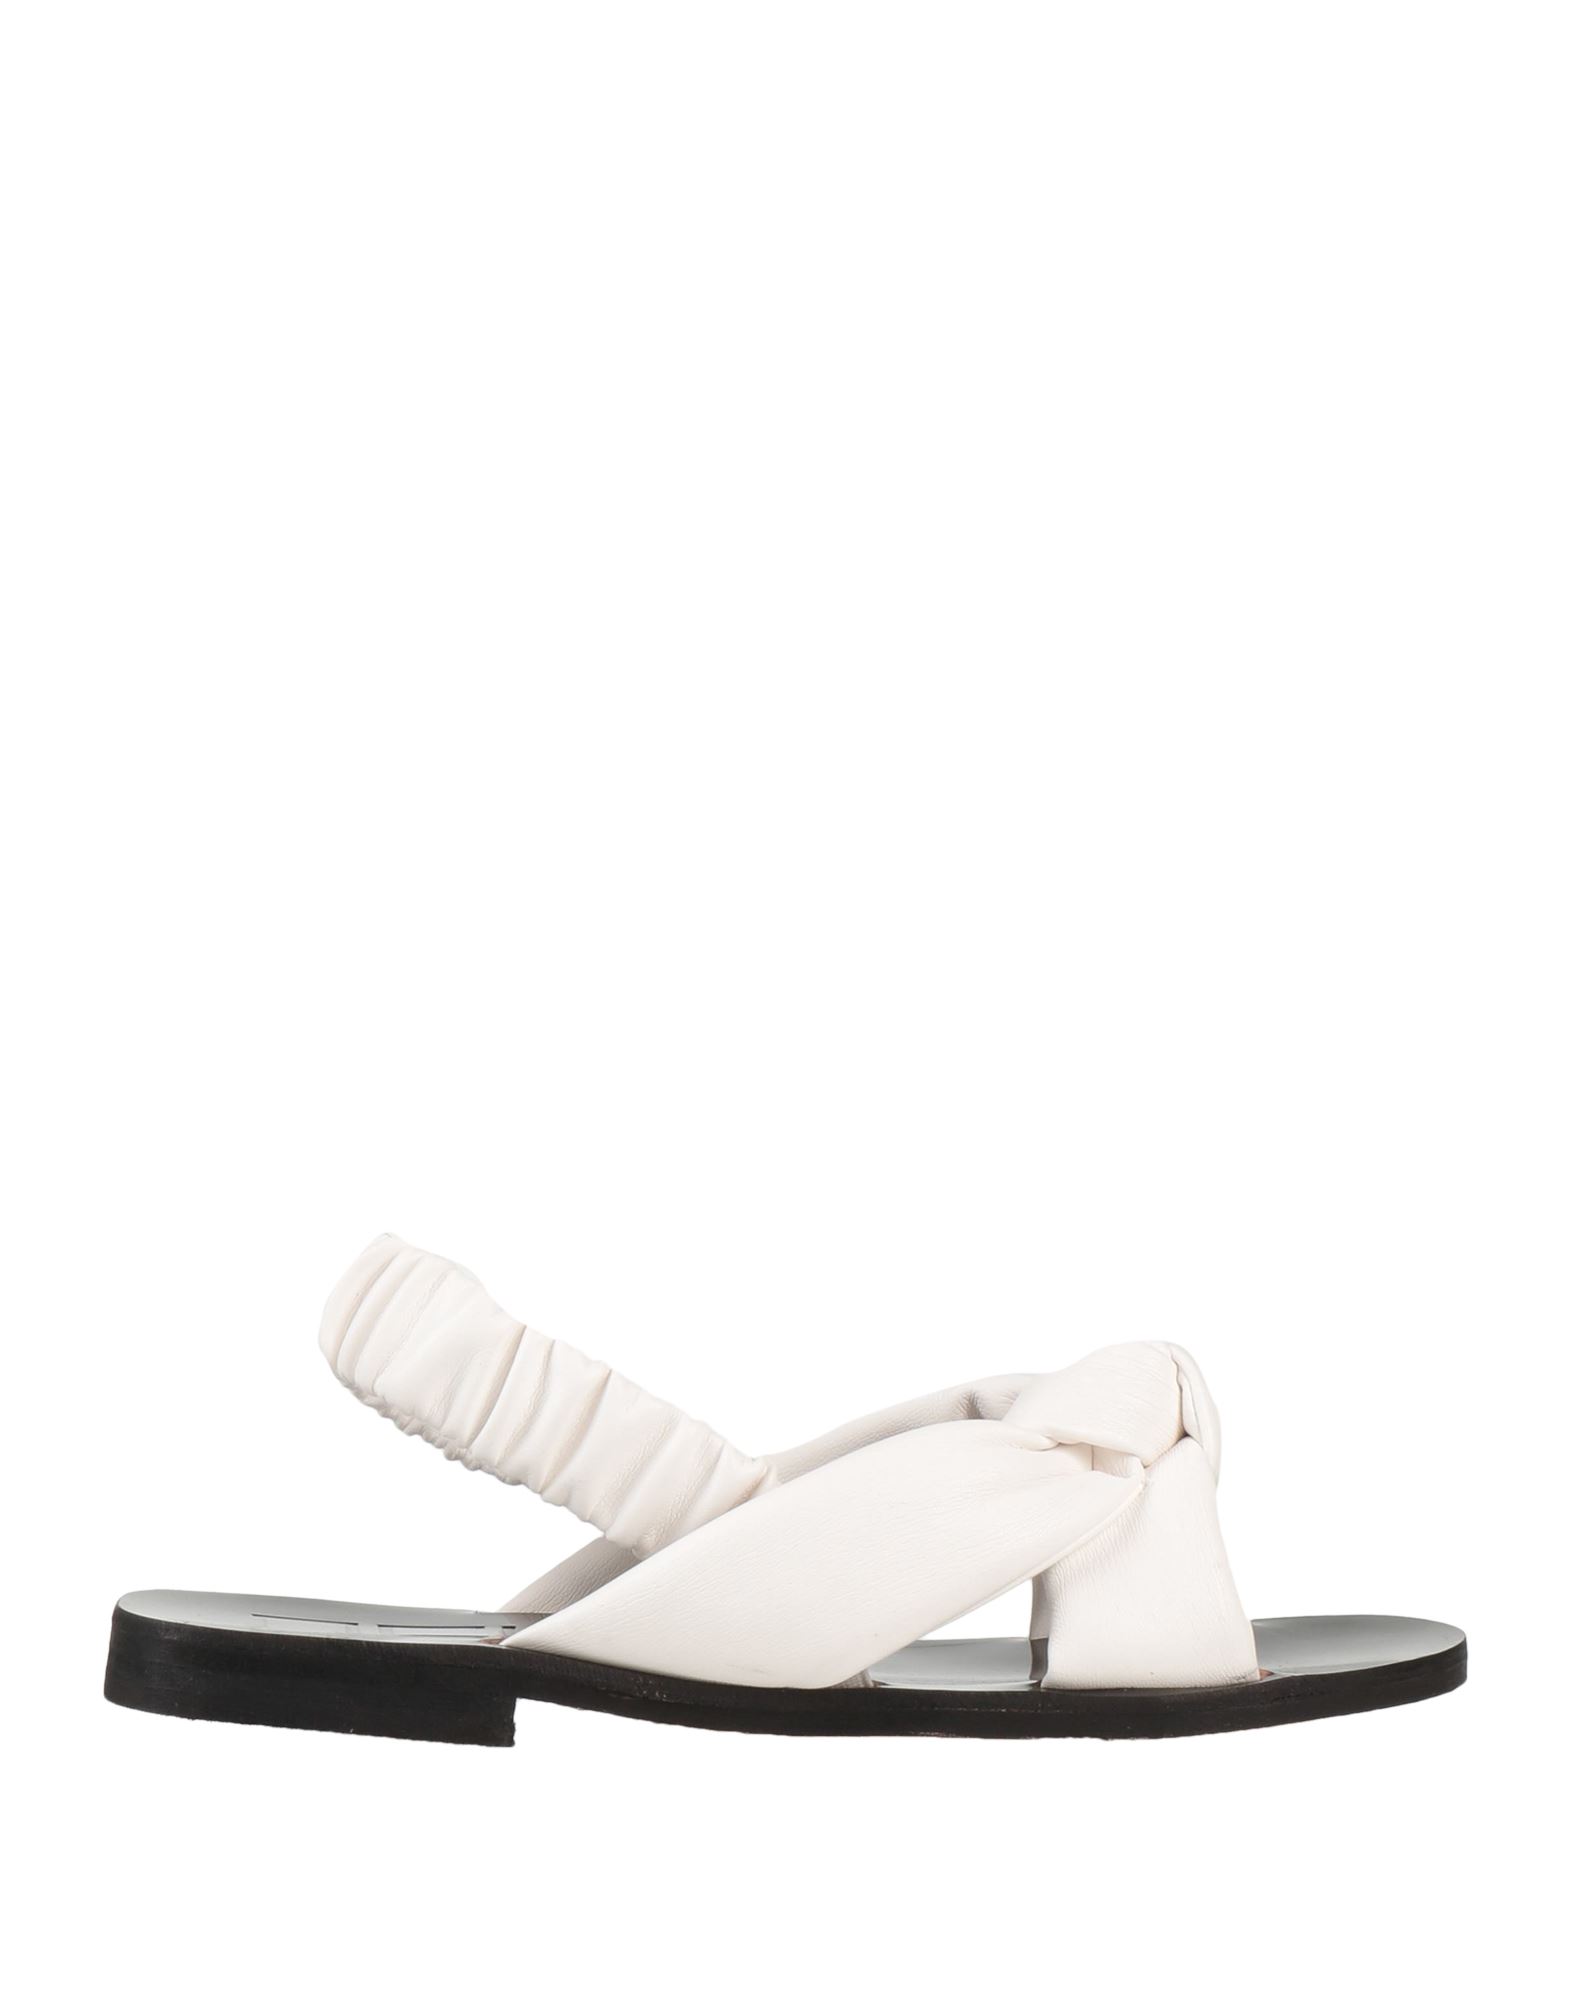 Ncub Sandals In White